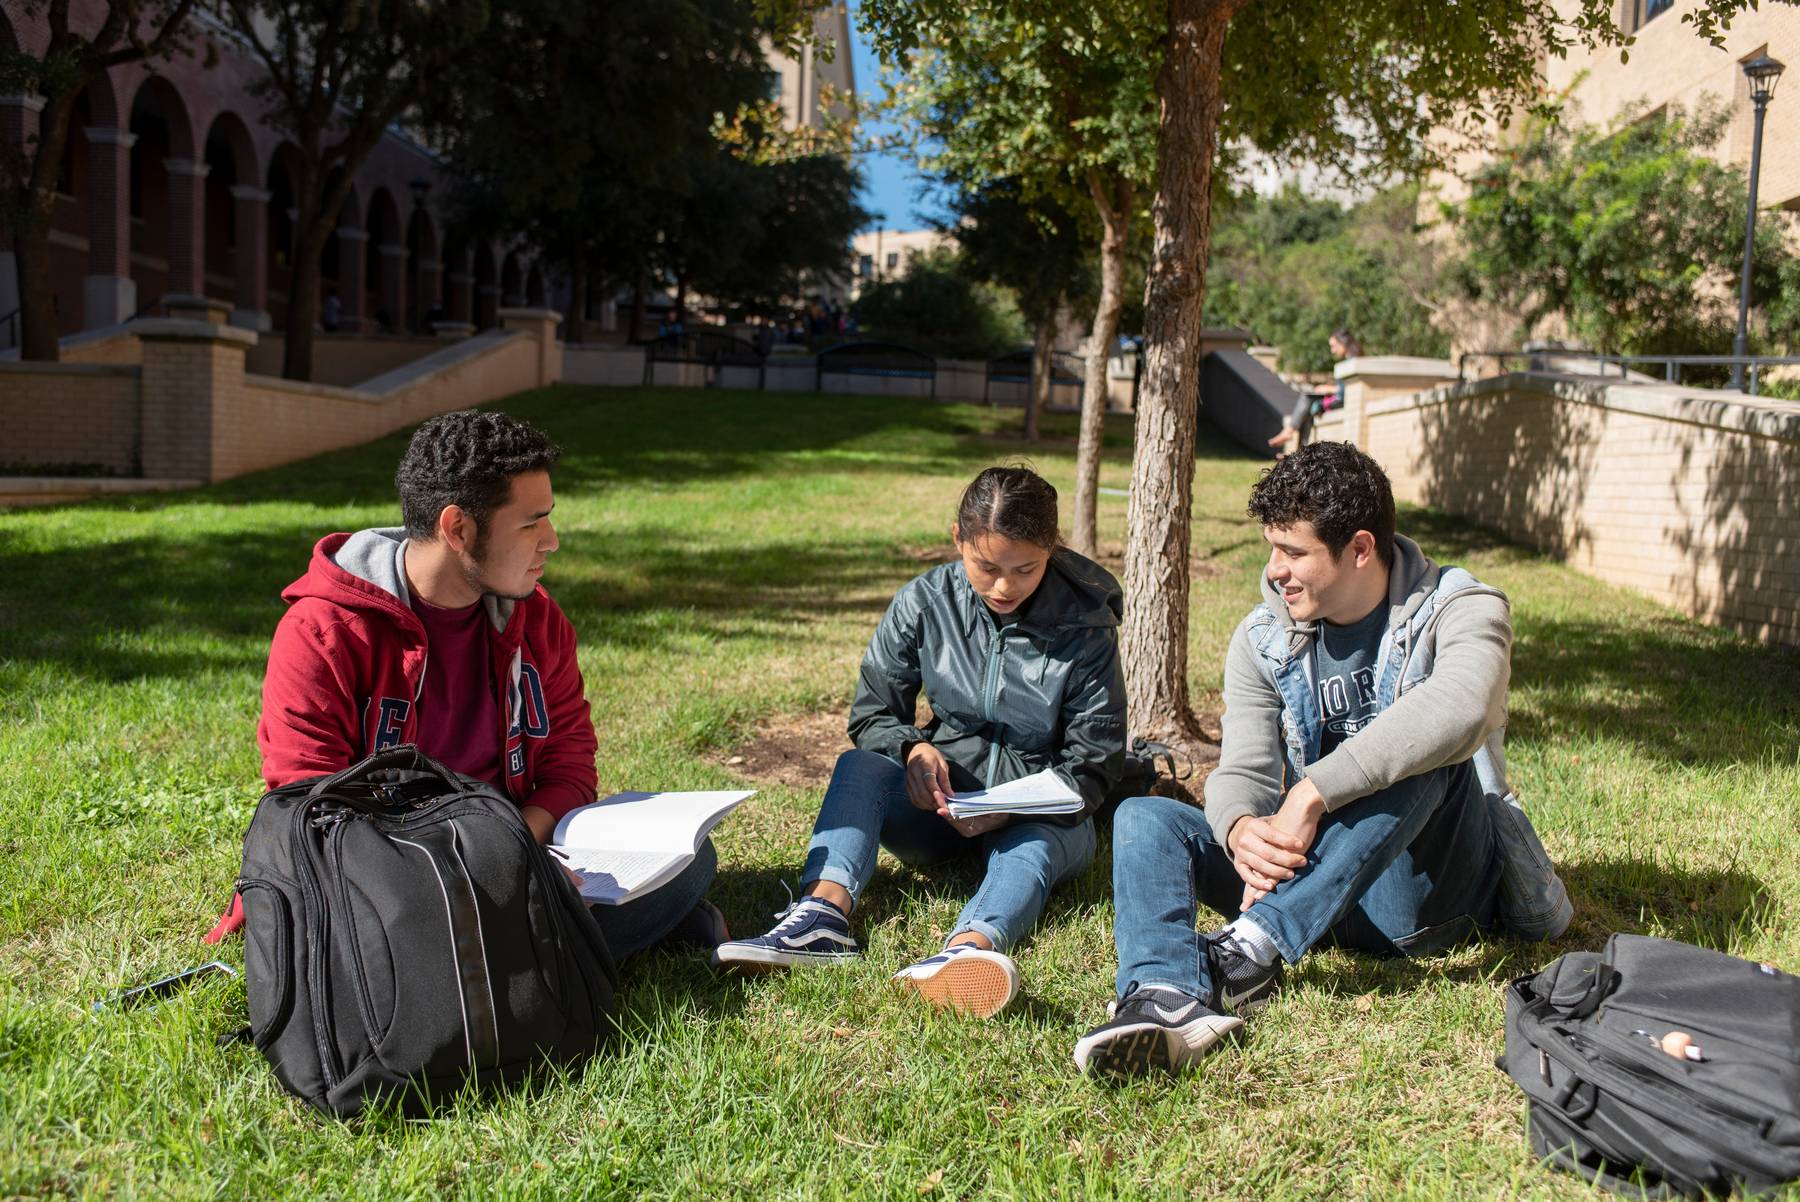 Students studying on the grass on campus.